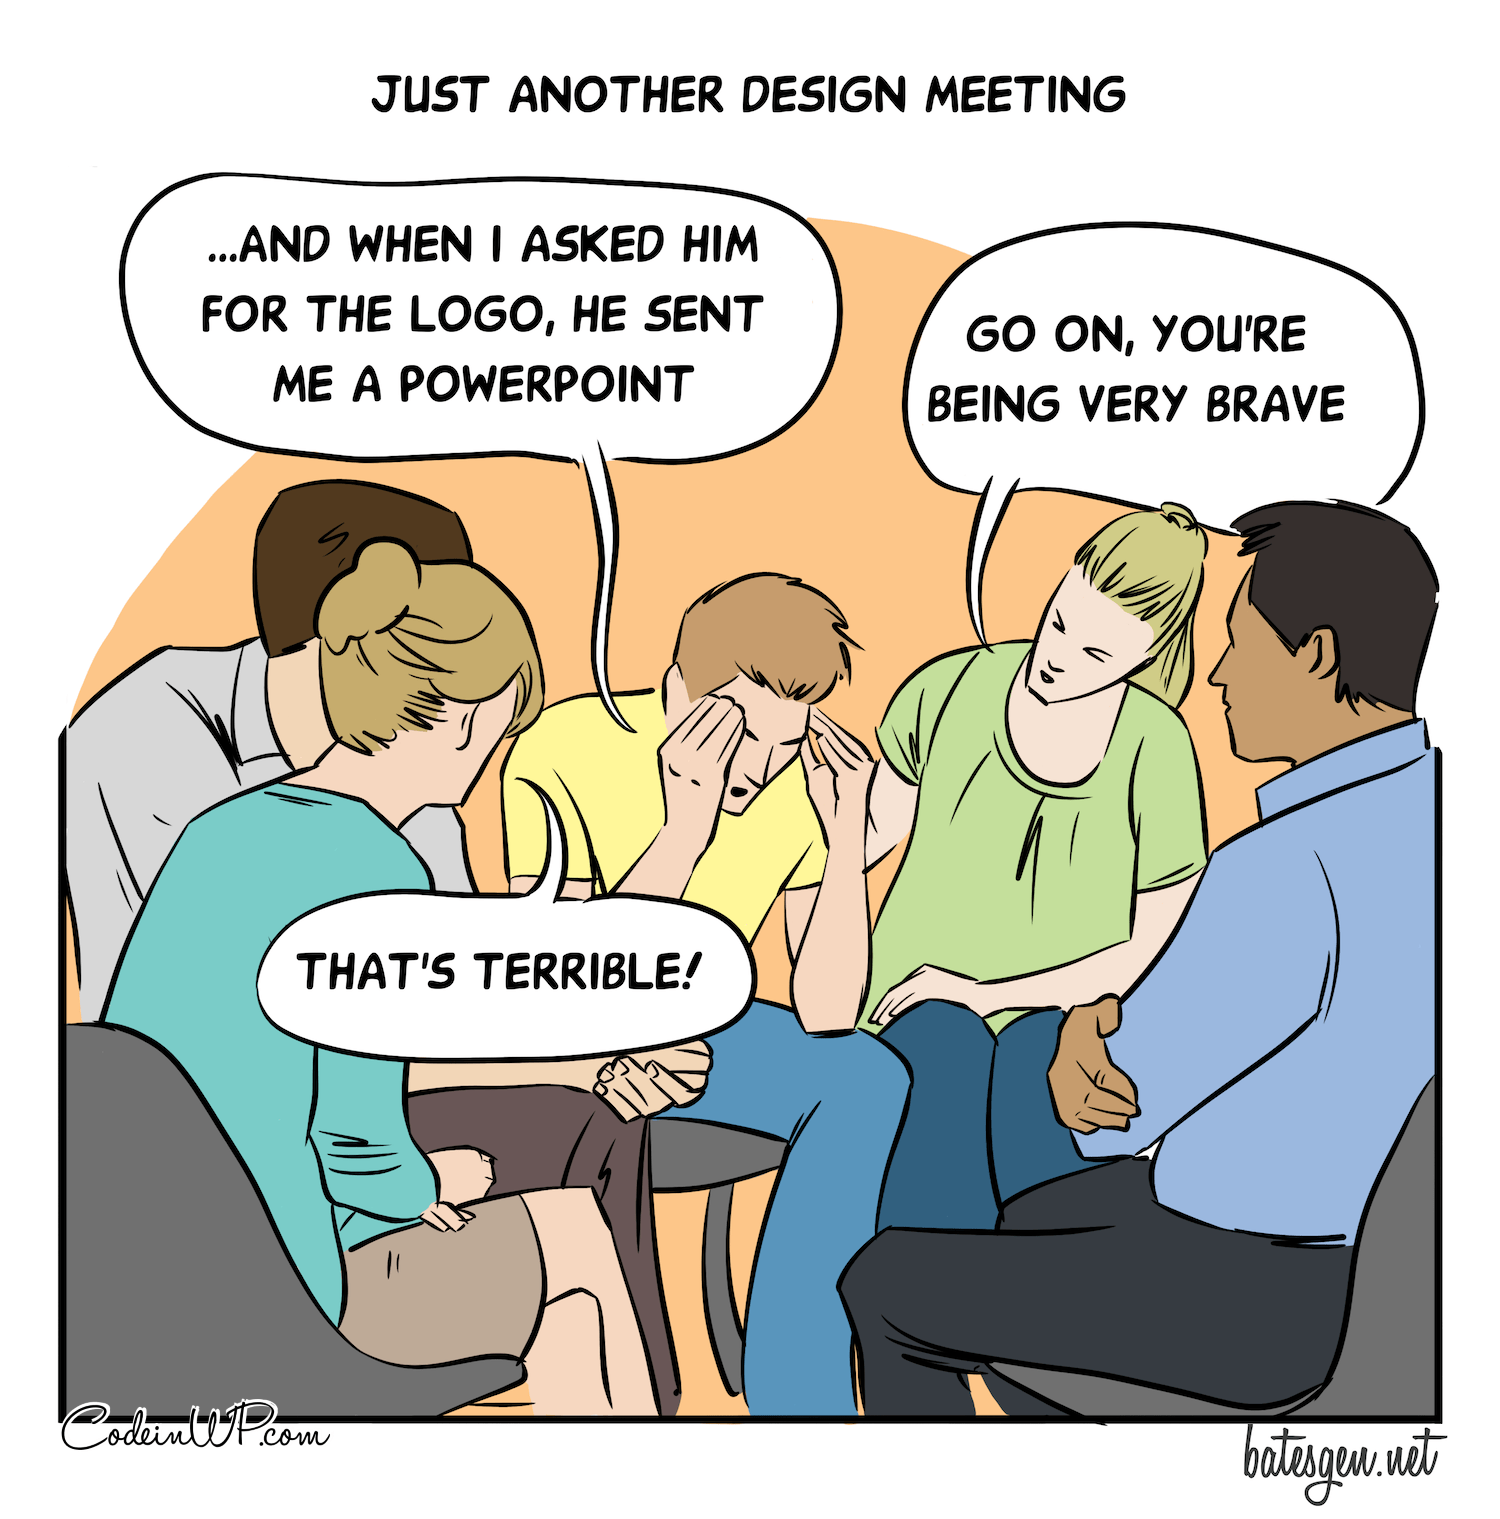 How designers support each other in times of a Powerpoint crisis